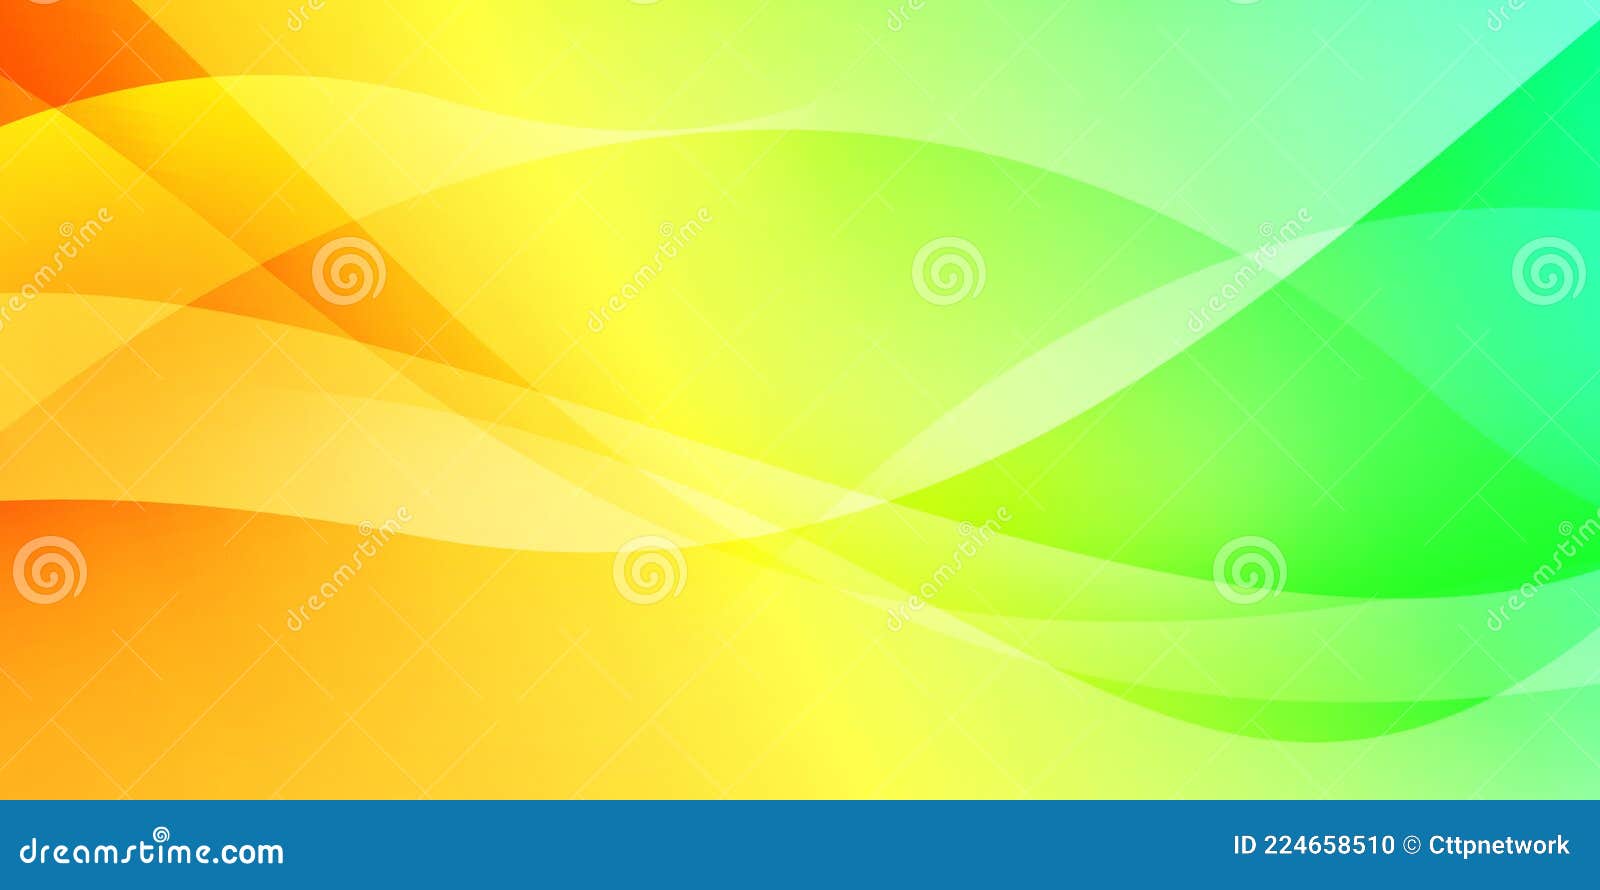 Background Design Images  Free Photos PNG Stickers Wallpapers   Backgrounds  rawpixel